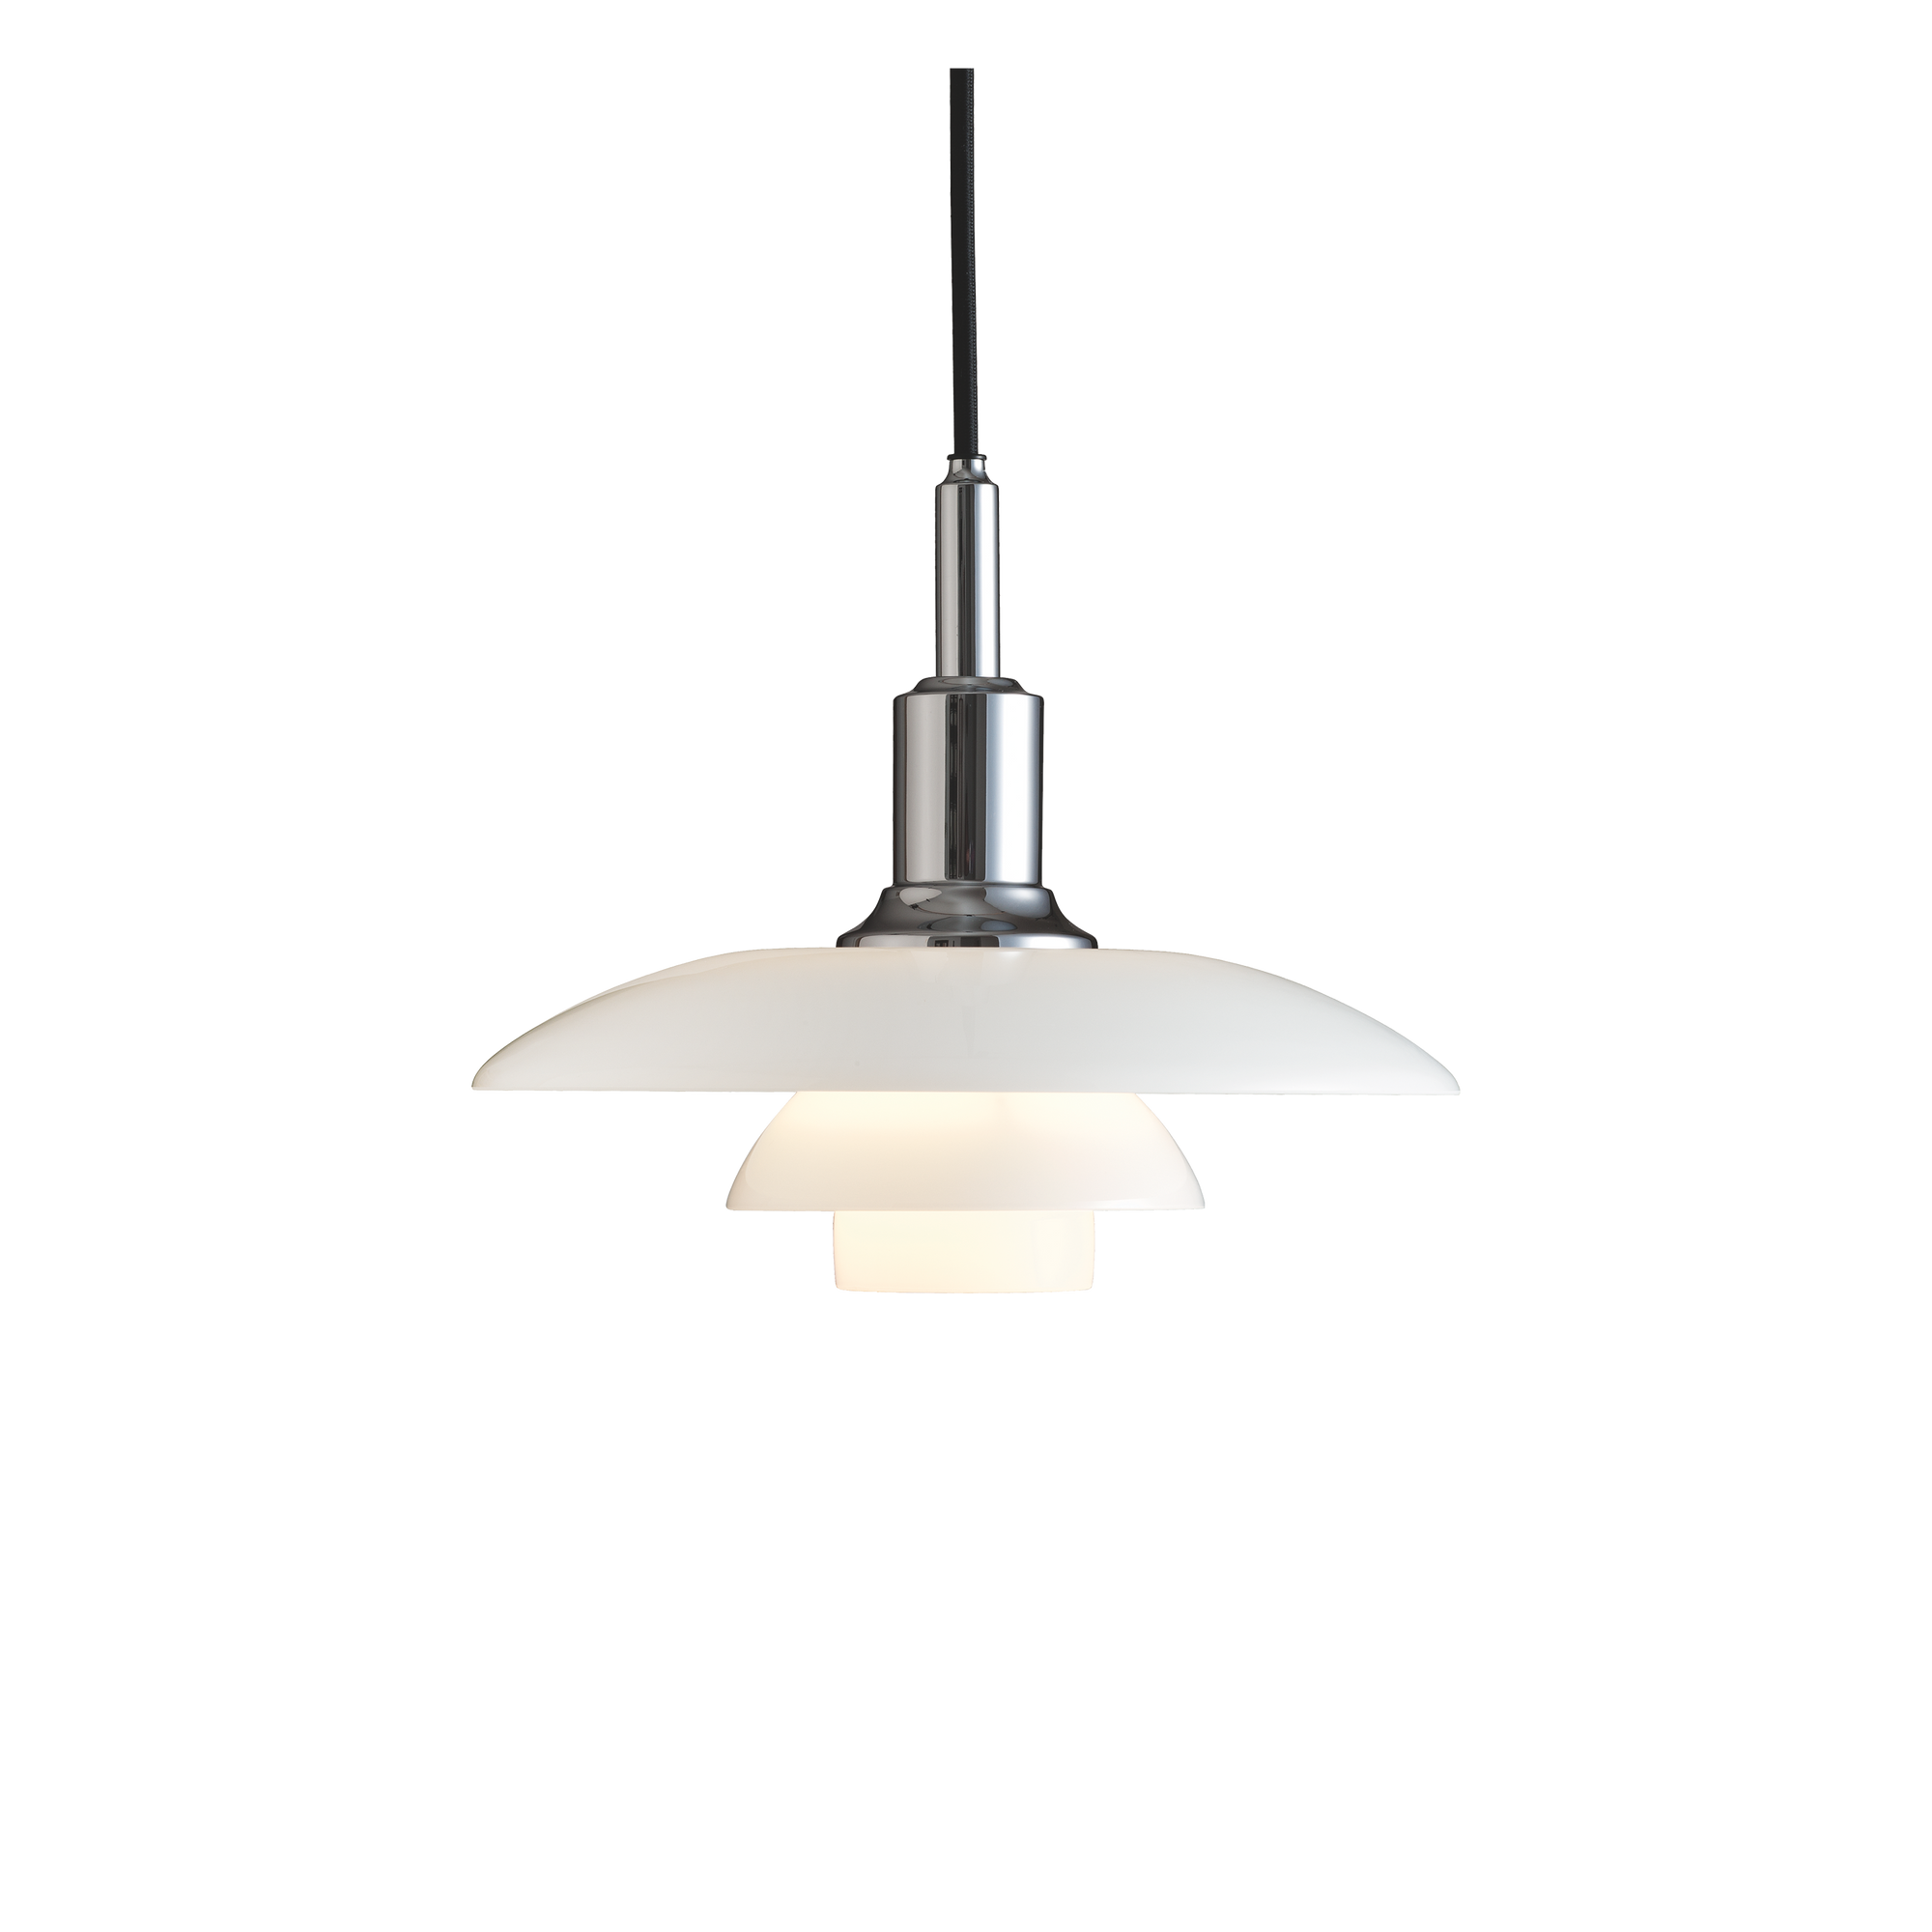 Designed by Poul Henningsen, the PH 3/2 Ceiling Lamp is an icon of Danish design.